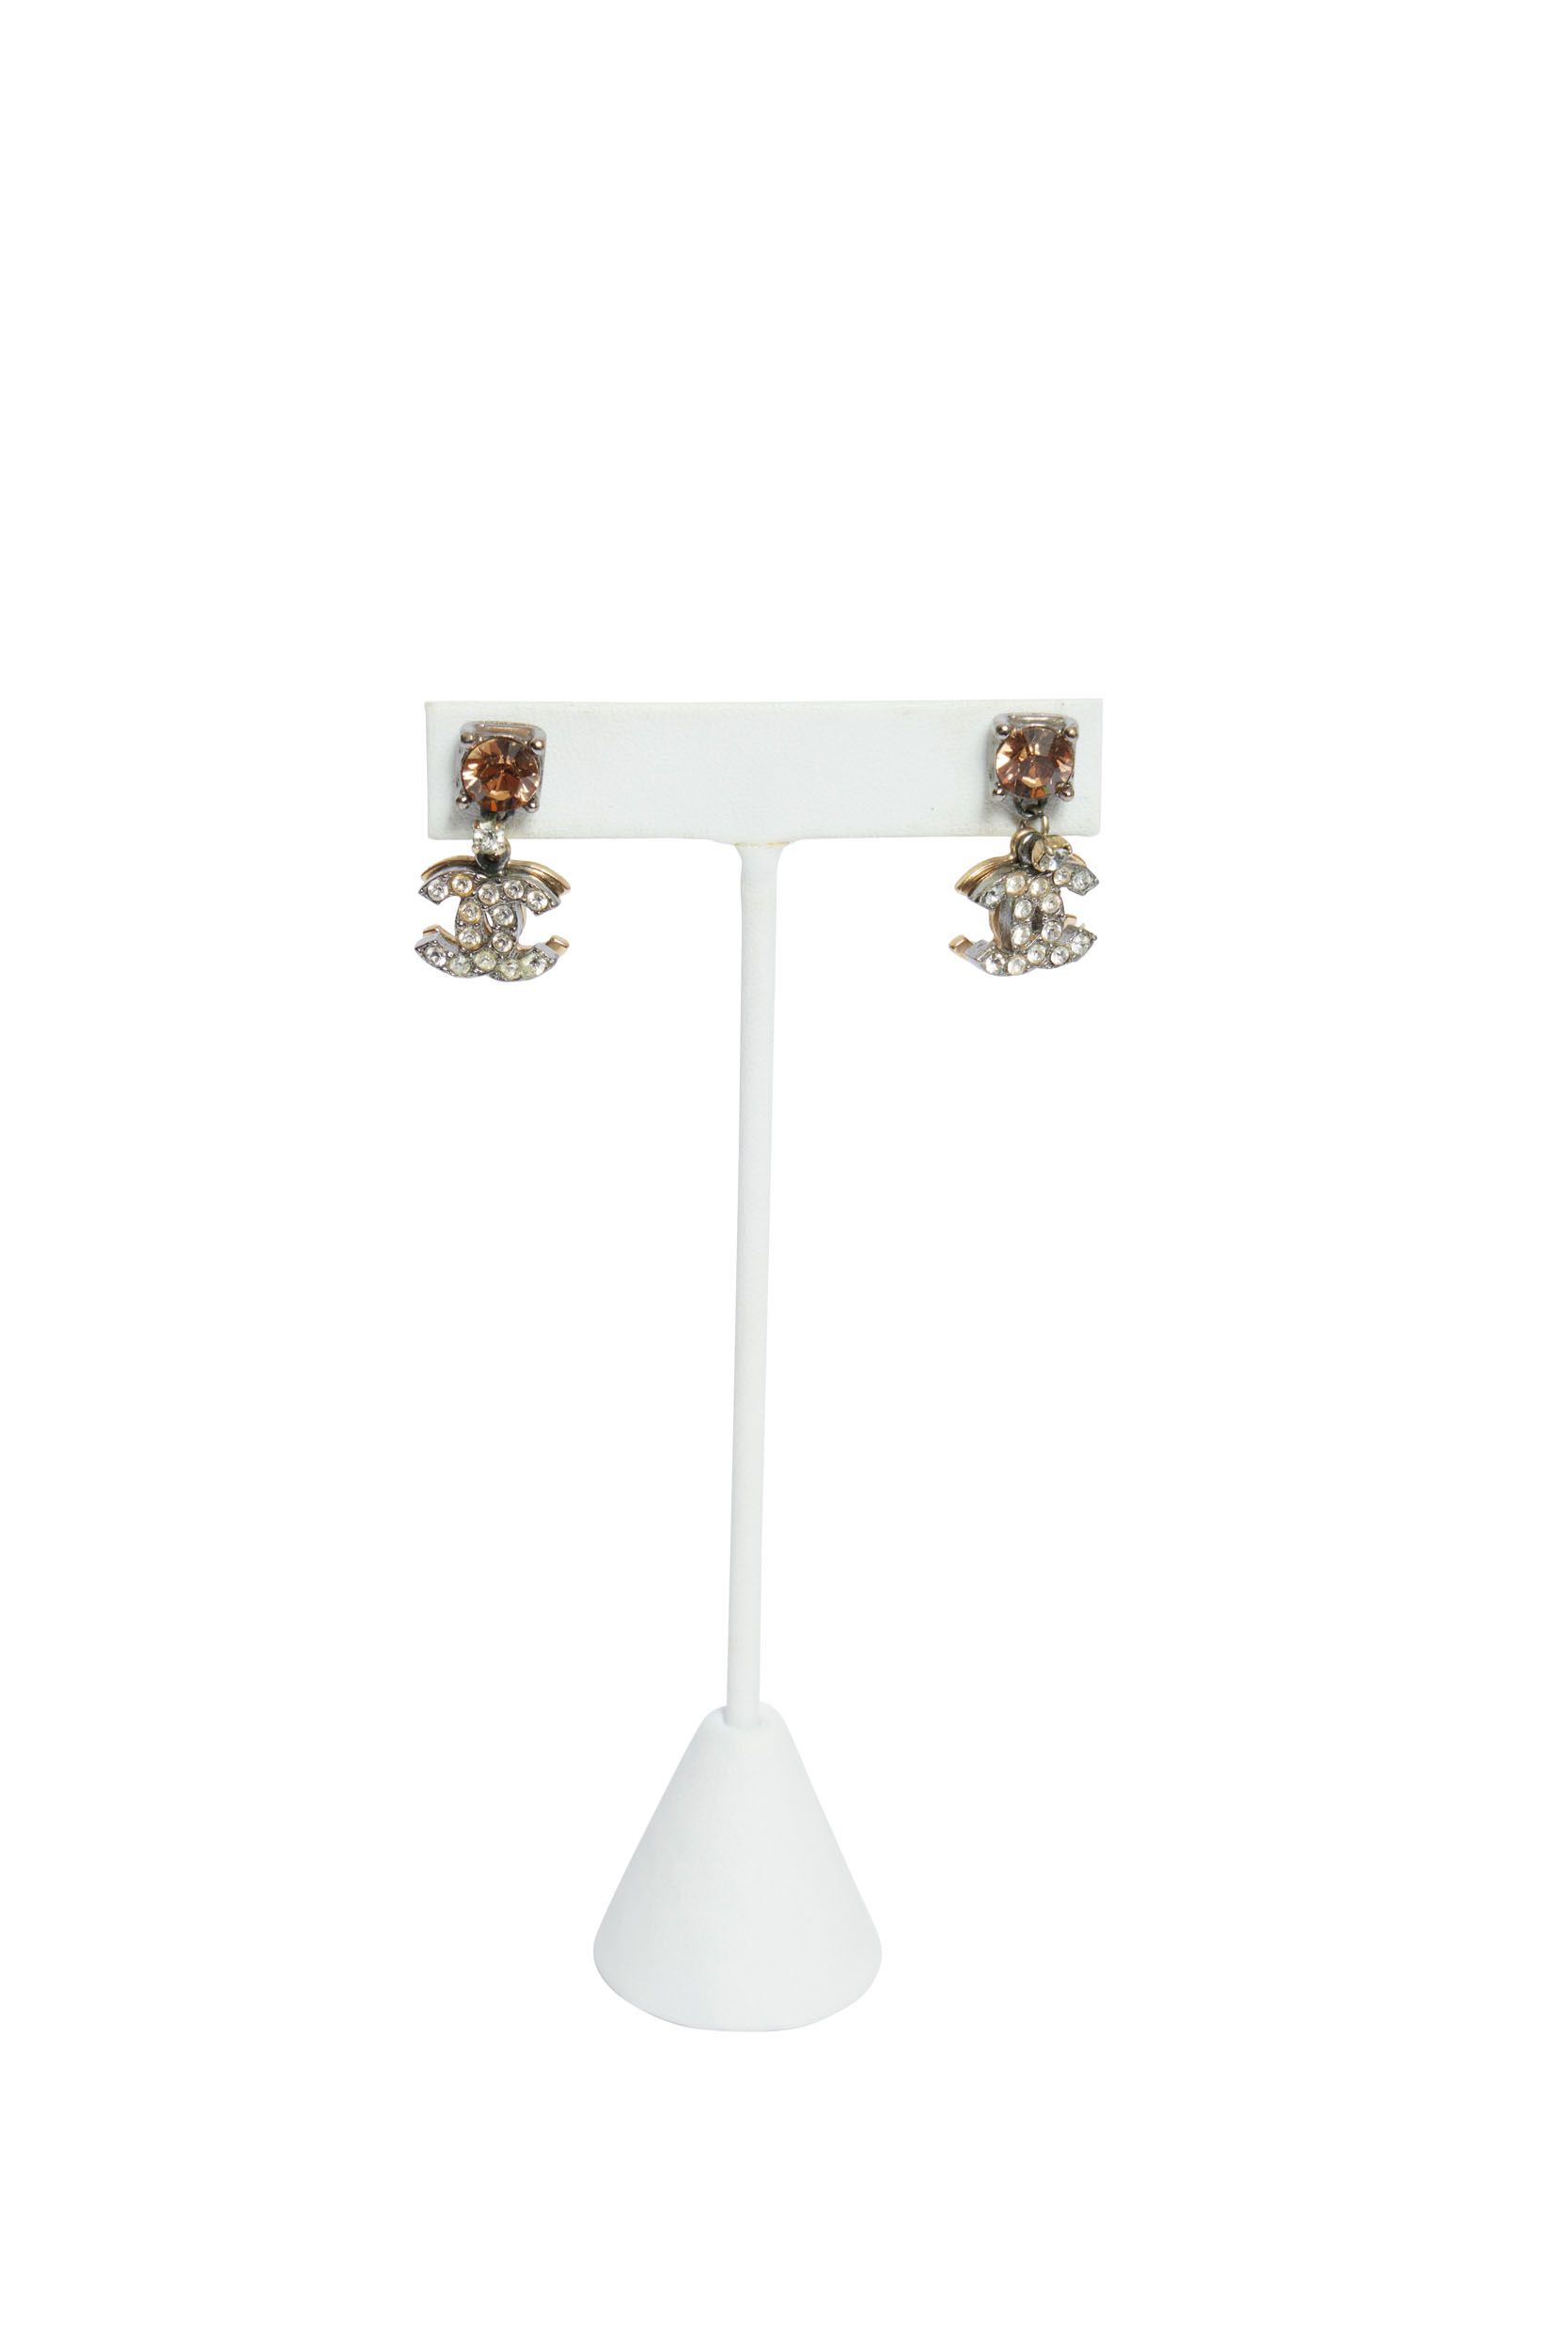 Chanel Amber Glass/CC Crystal Earrings~P77645774